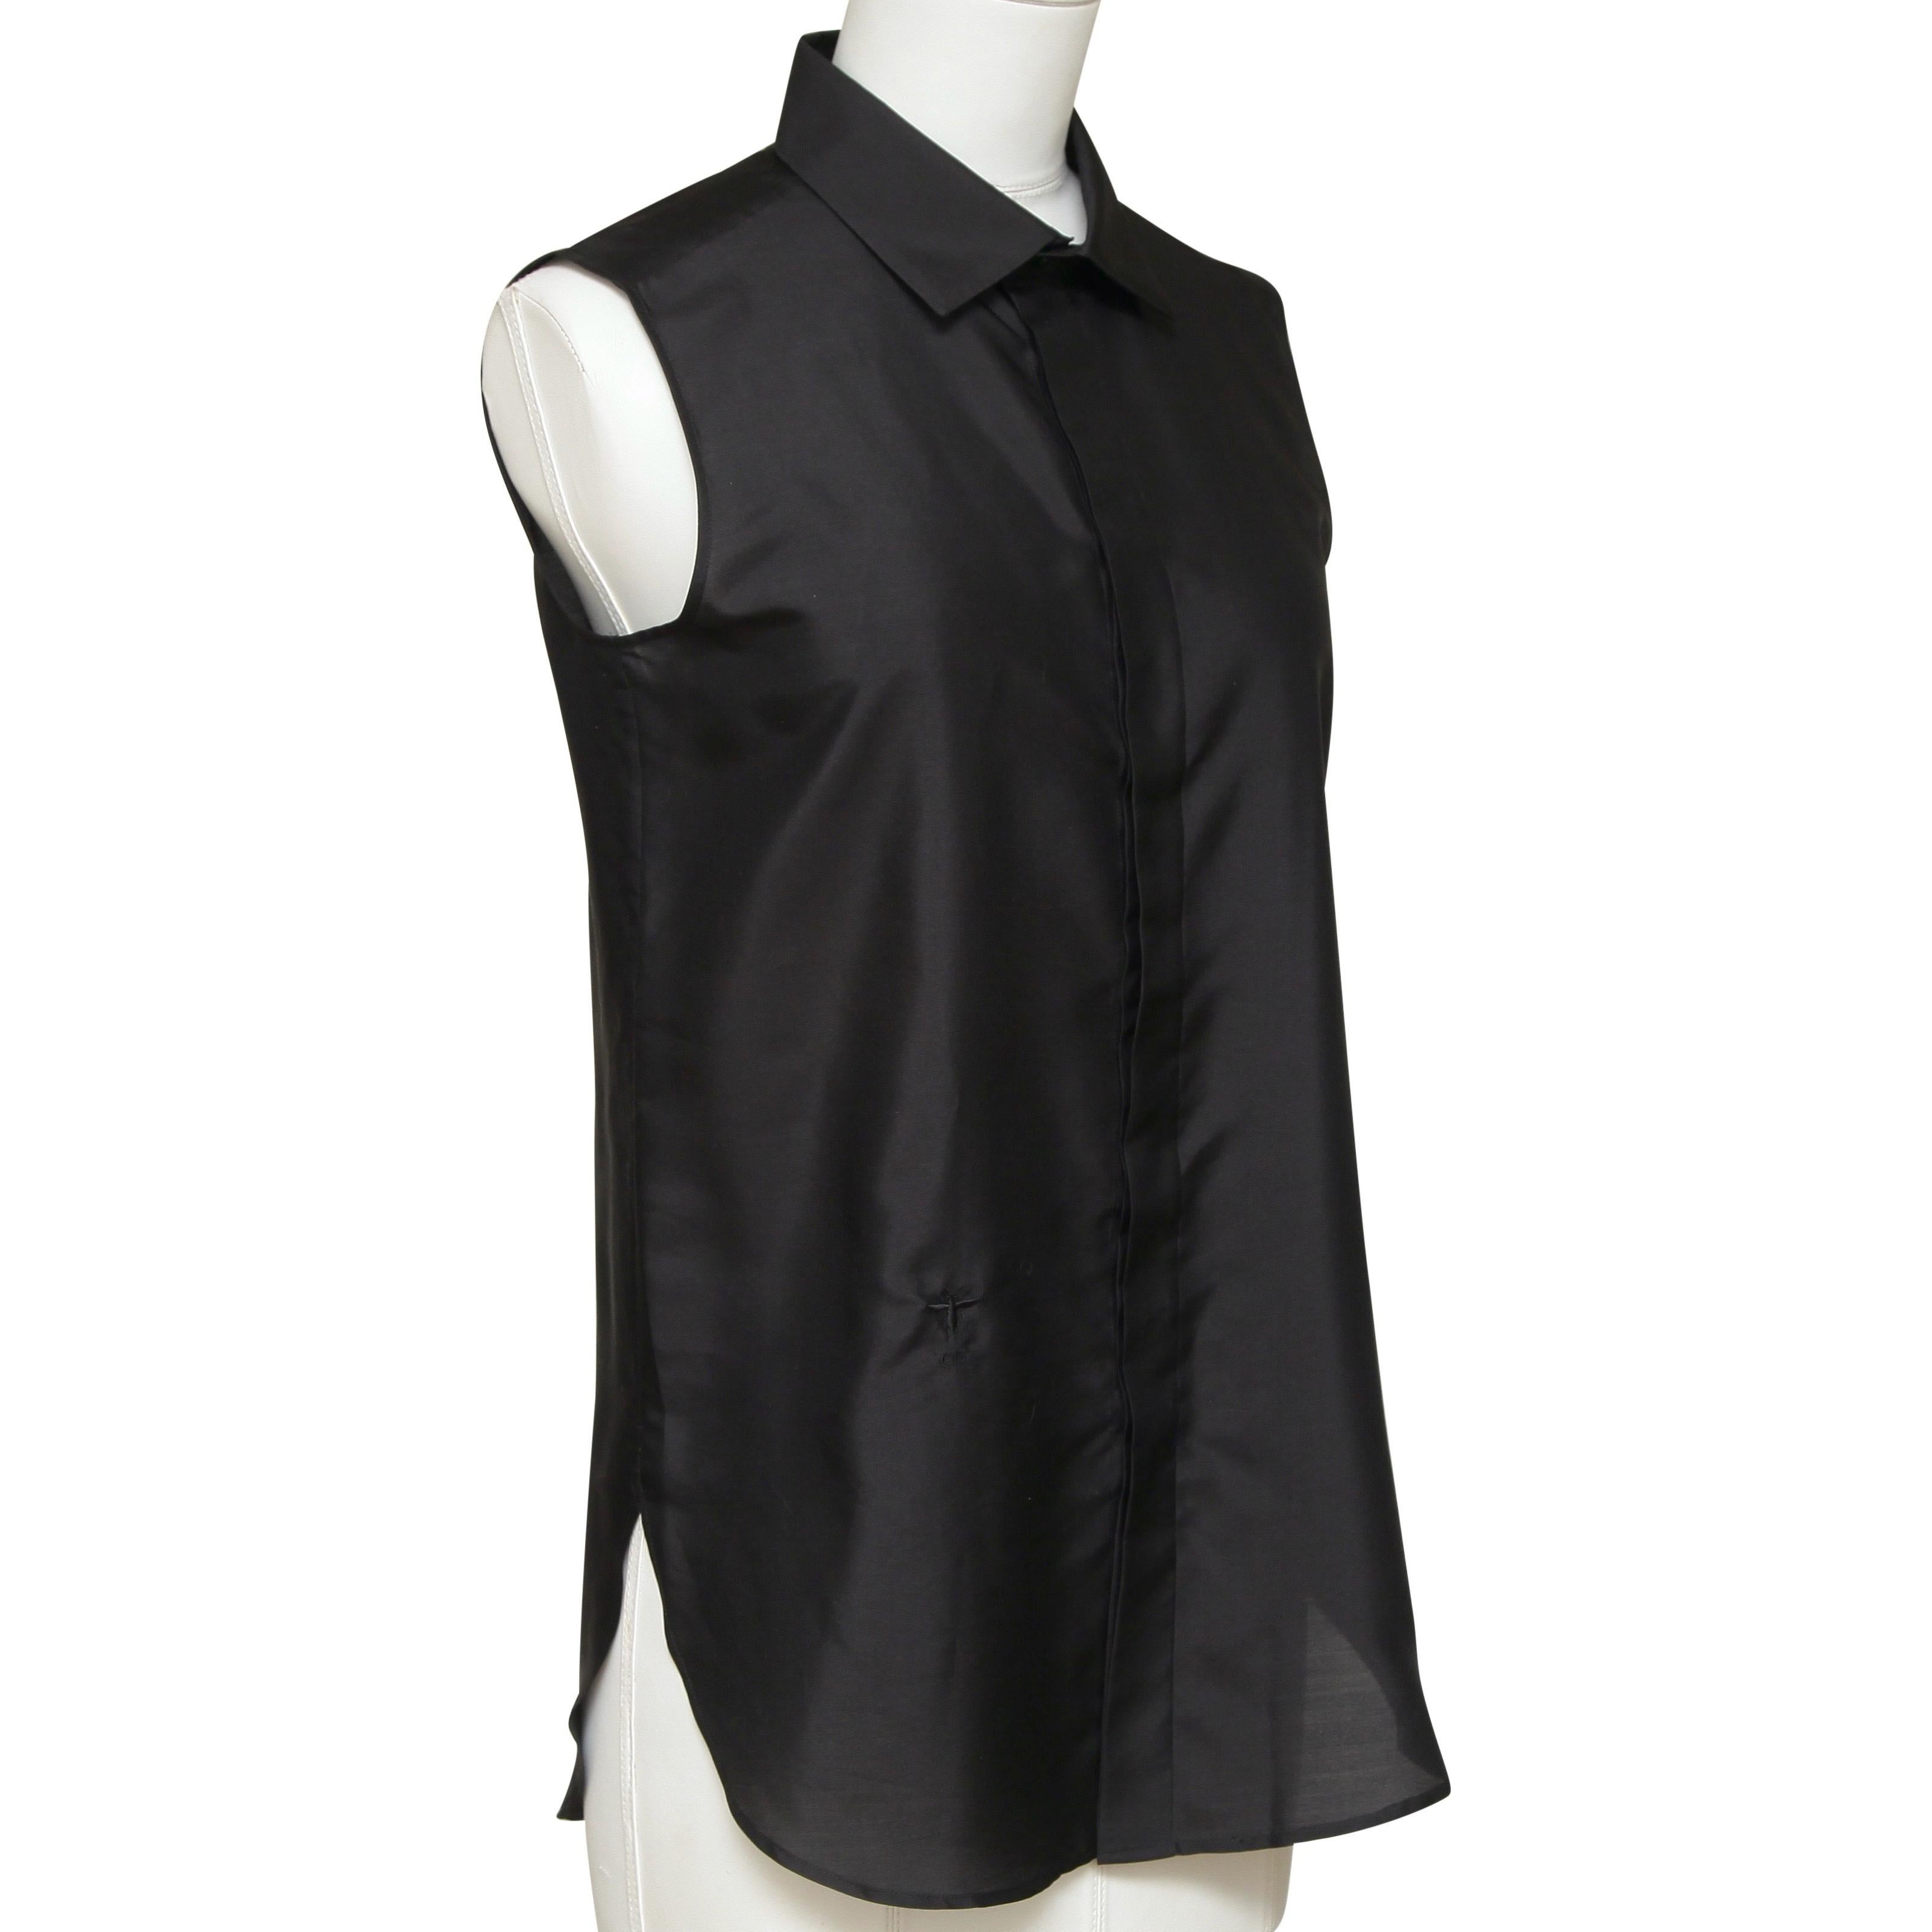 GUARANTEED AUTHENTIC CHRISTIAN DIOR BLACK SLEEVELESS SILK BLOUSE

Design:
- Sleeveless black silk blouse.
- Pointed collar.
- Covered button down front.
- Logo at lower right hip.

Material: 100% Silk

Size: F 36, US 4

Measurements (Approximate